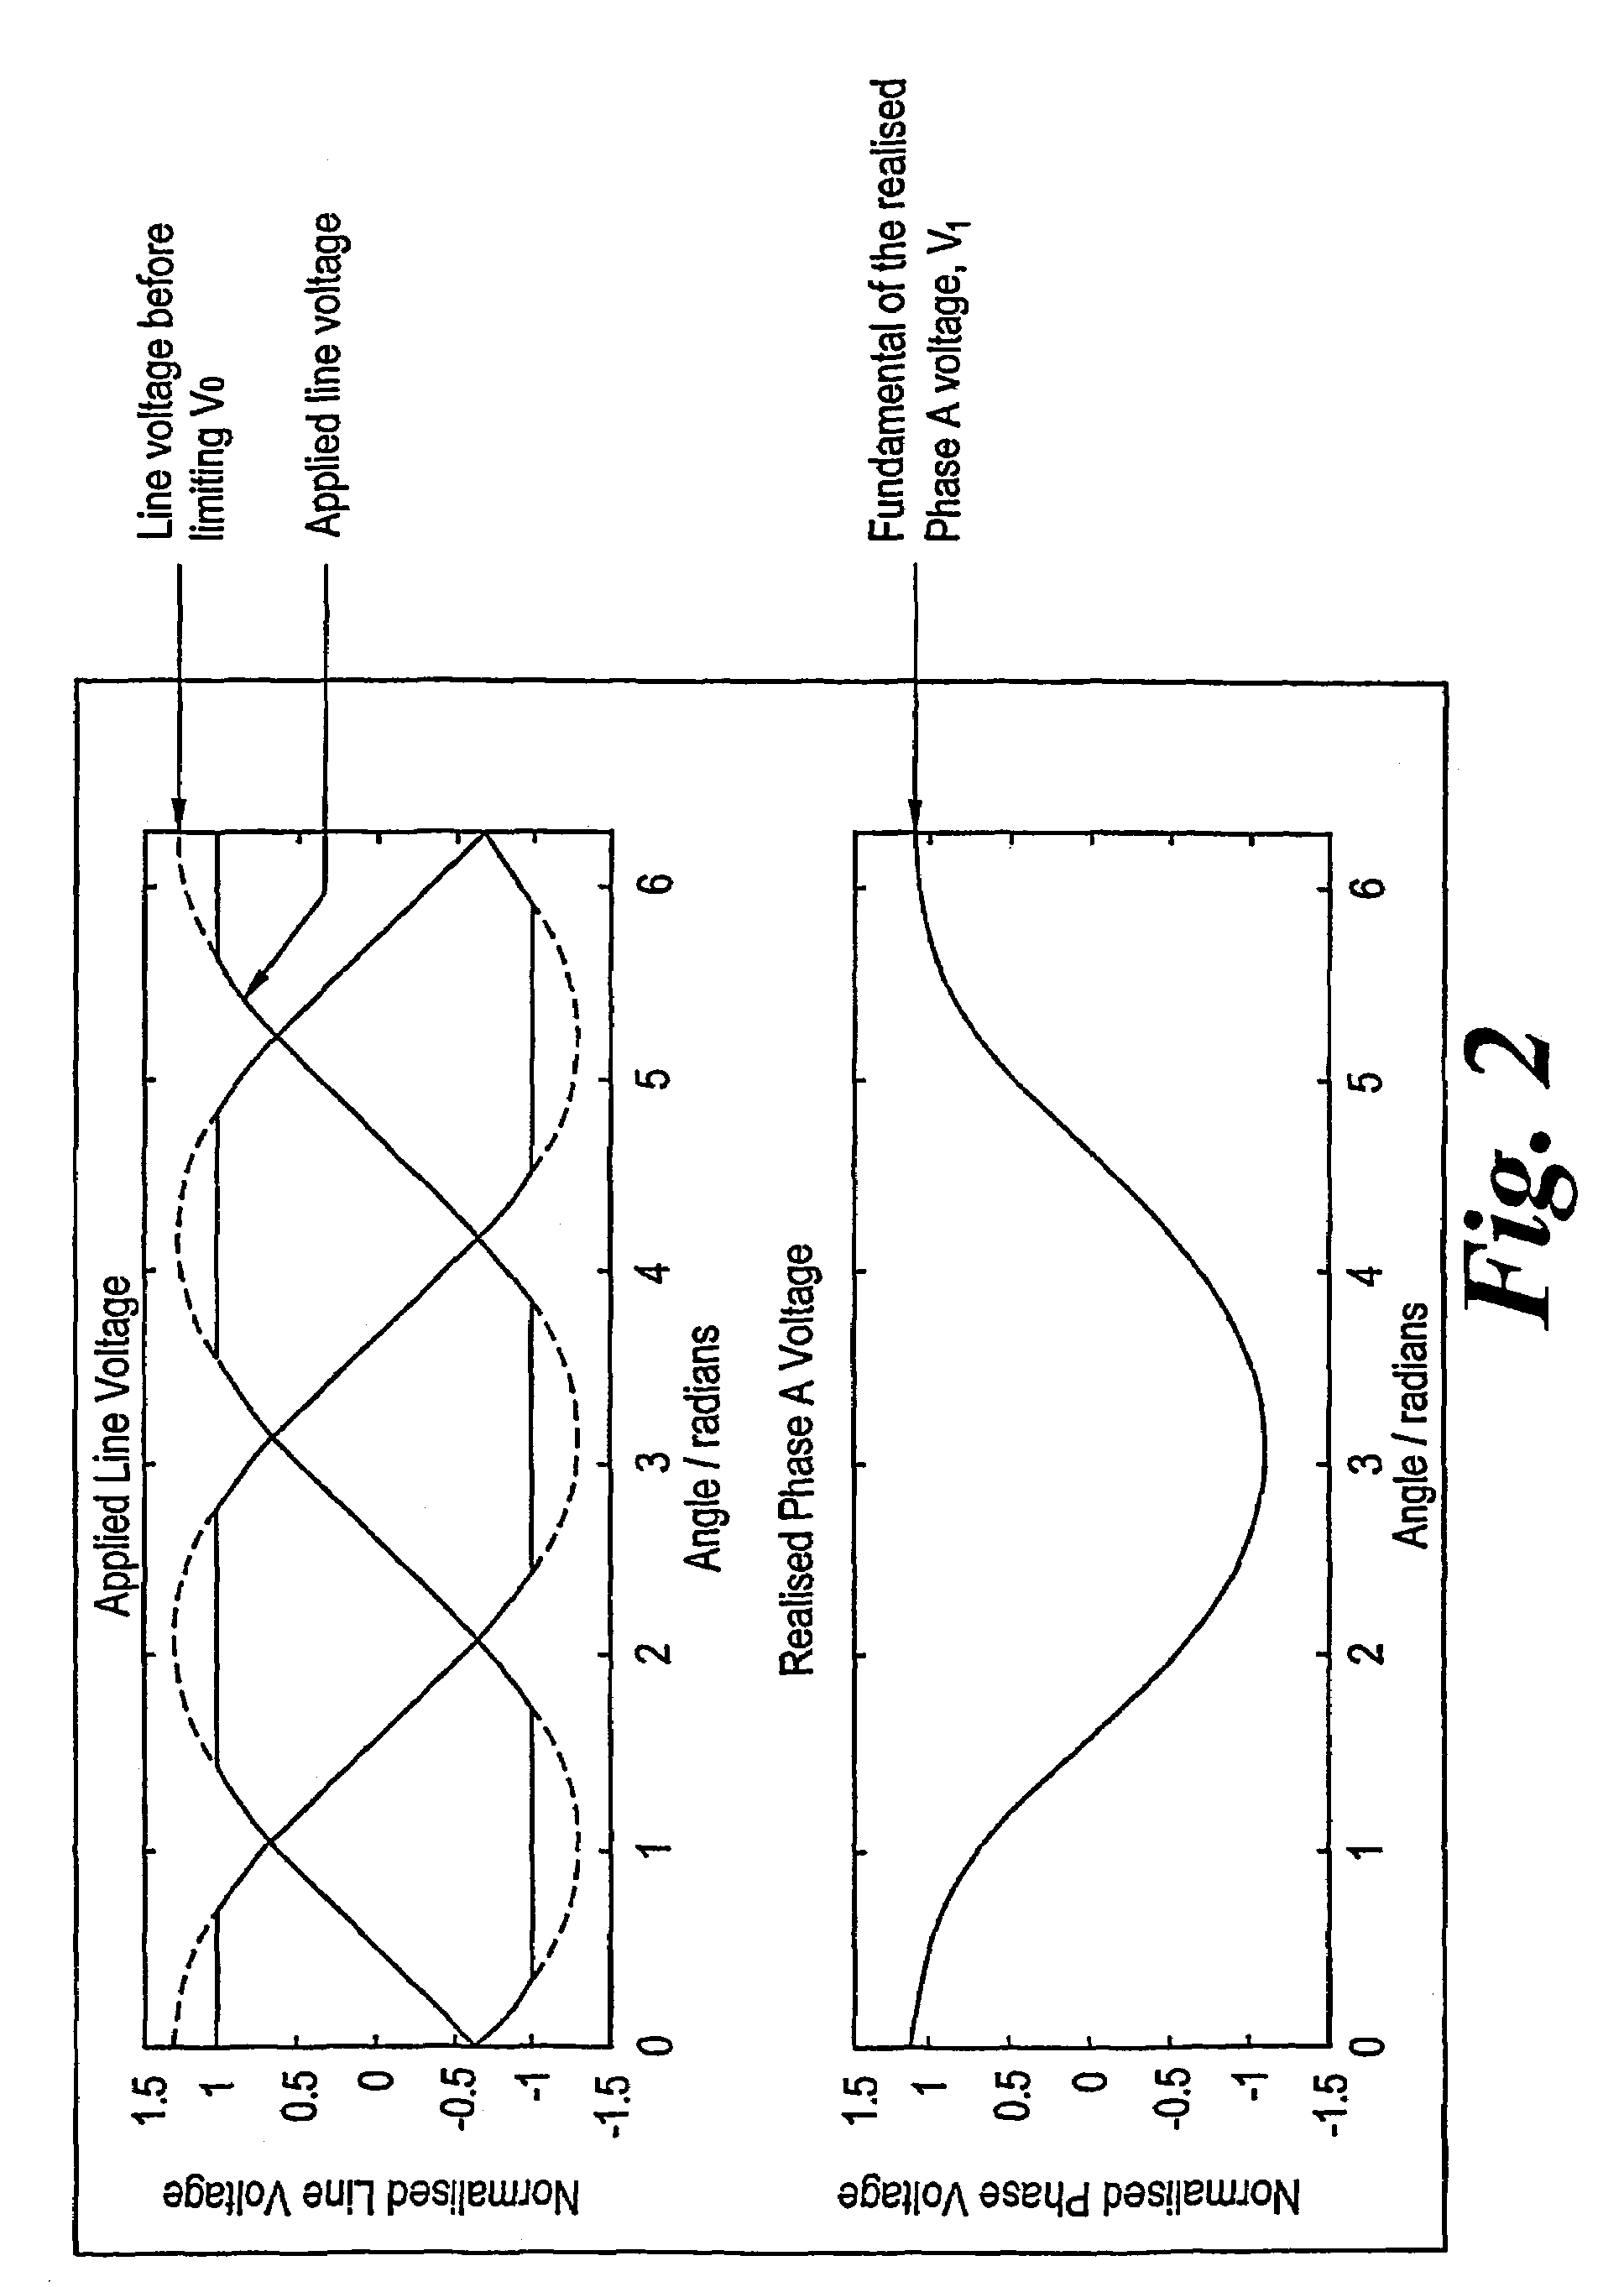 Motor drive control with a single current sensor using space vector technique